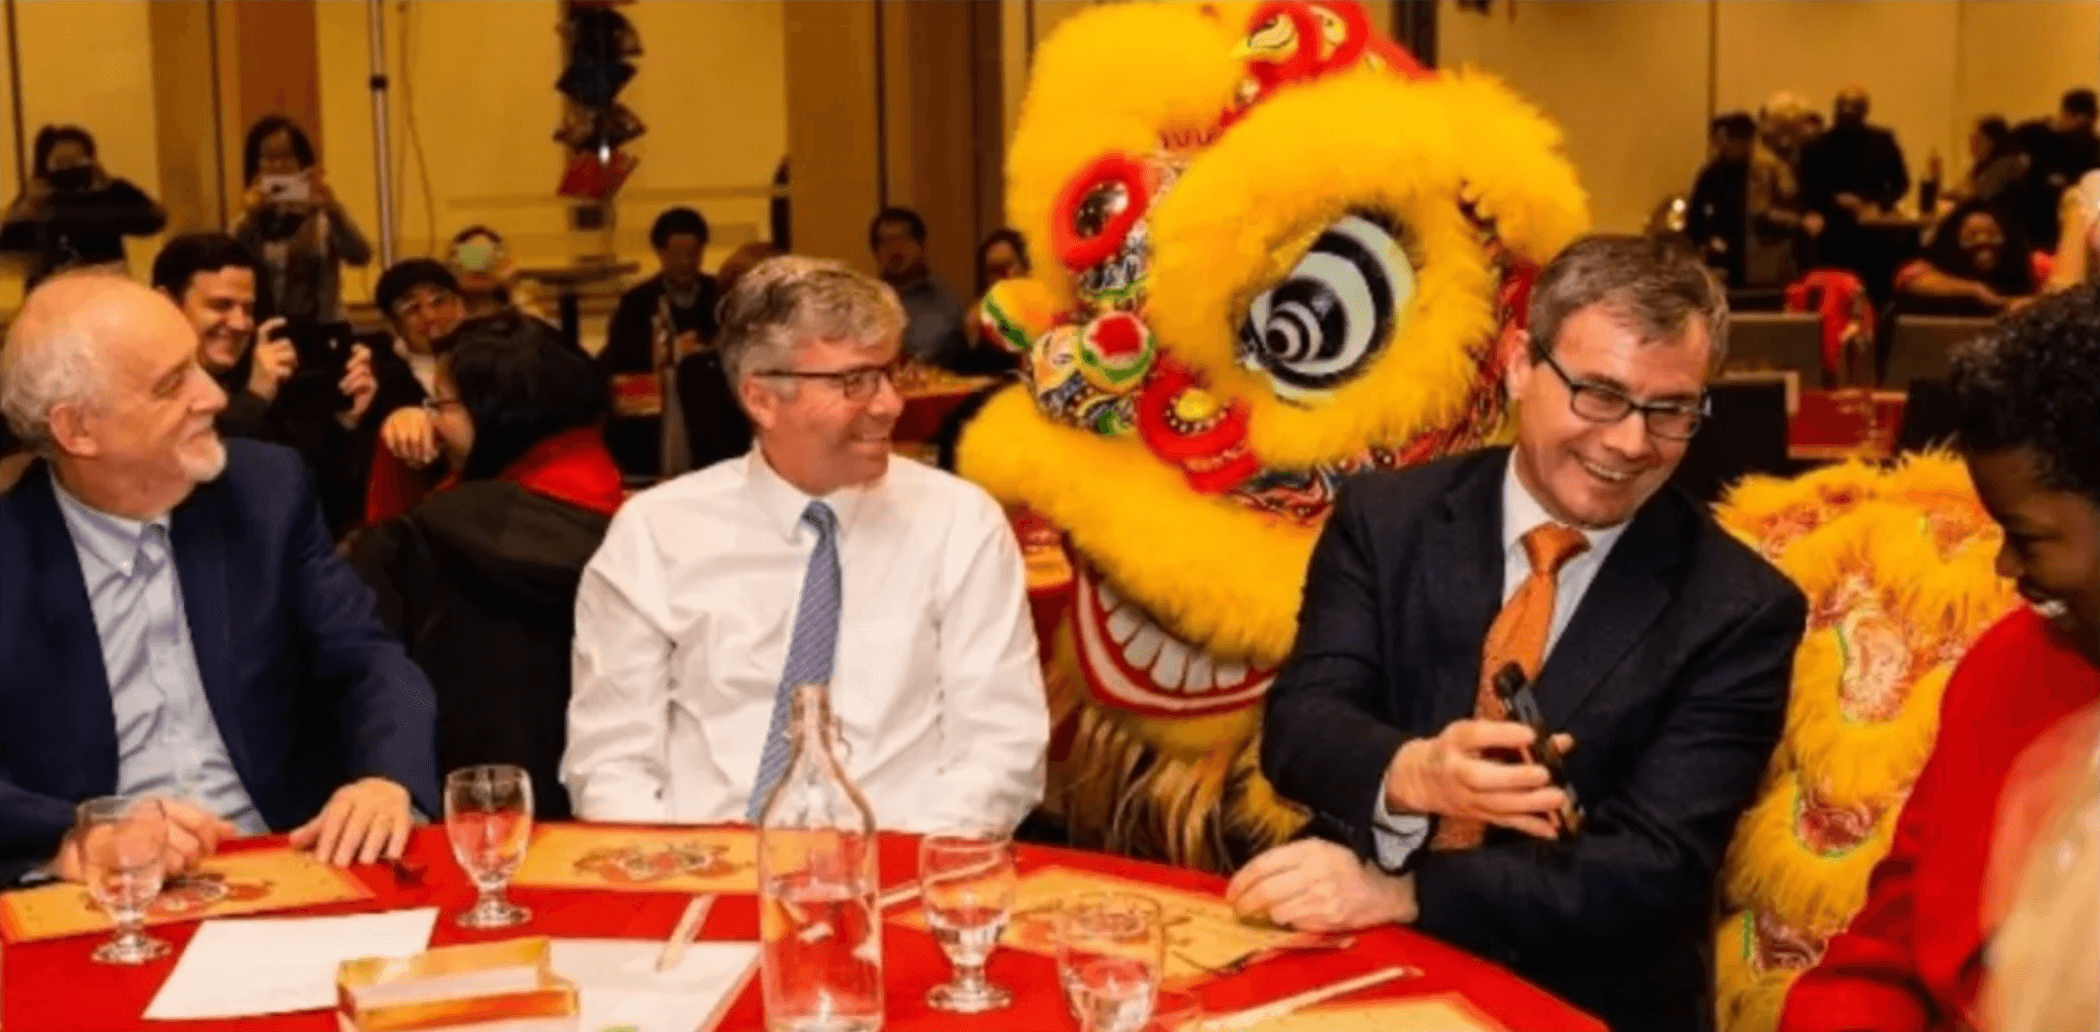 Event attendees entertained by Chinese lion